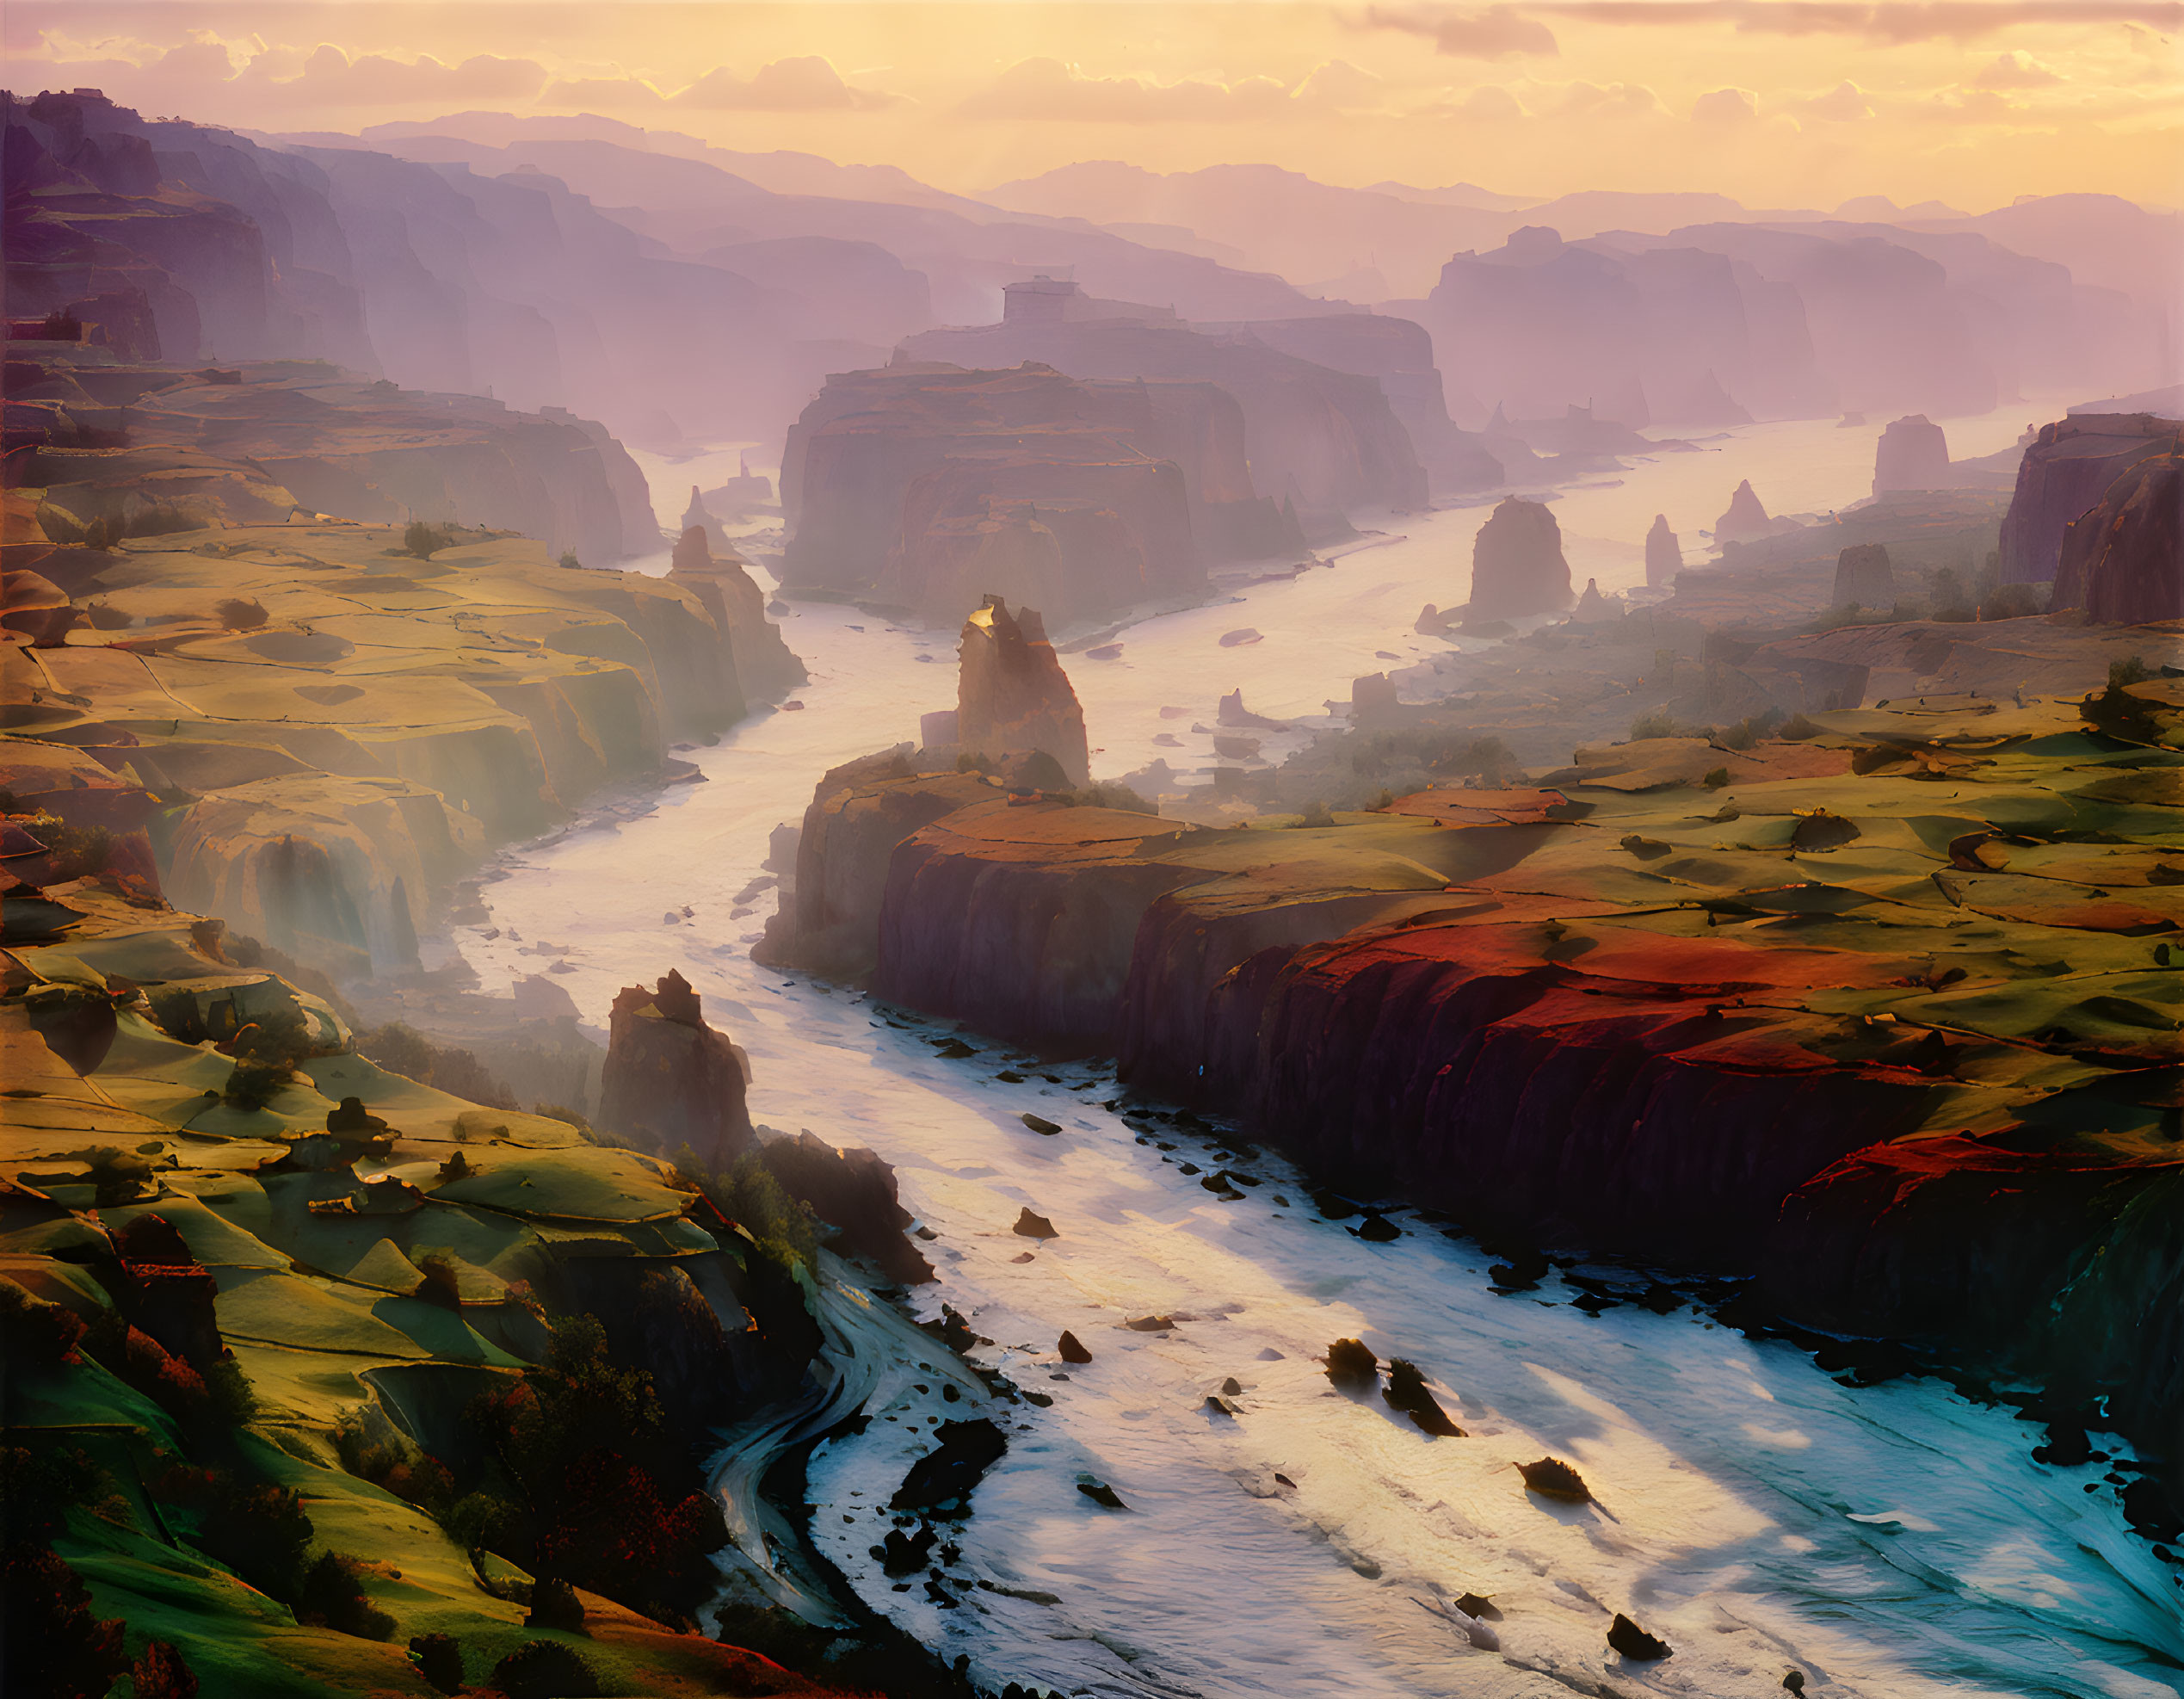 Majestic sunset view over canyon with river and cliffs